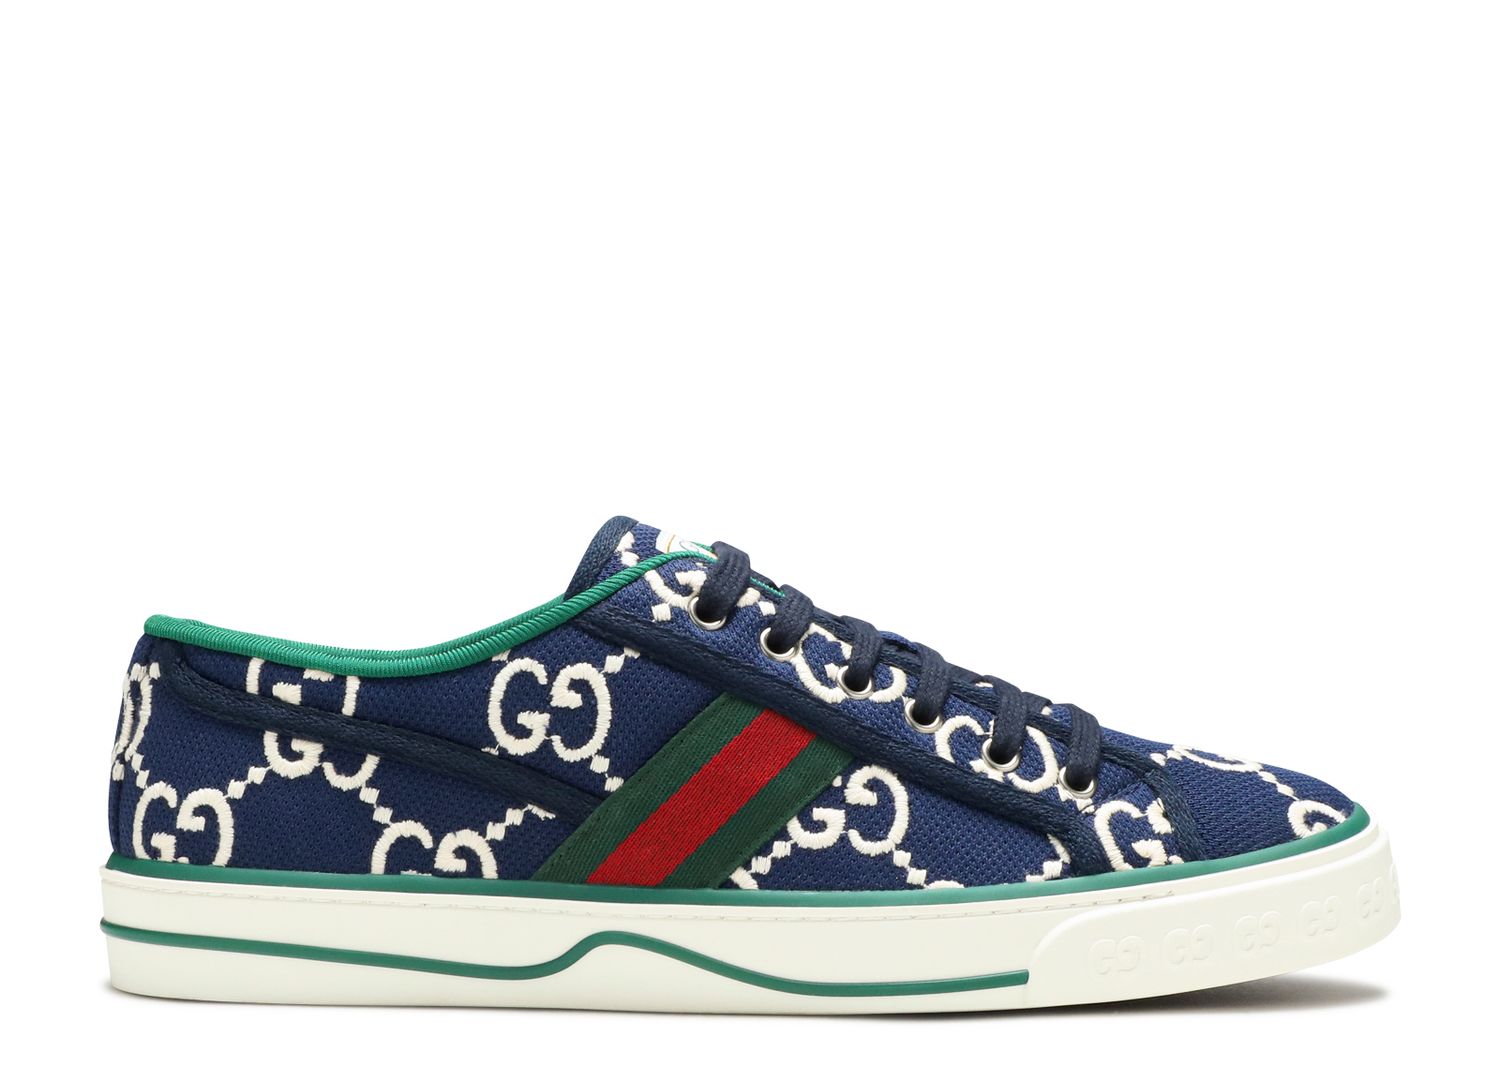 Gucci Tennis 1977 'Ink Blue' - Gucci - 606111 H0G10 4370 - ink blue/red ...